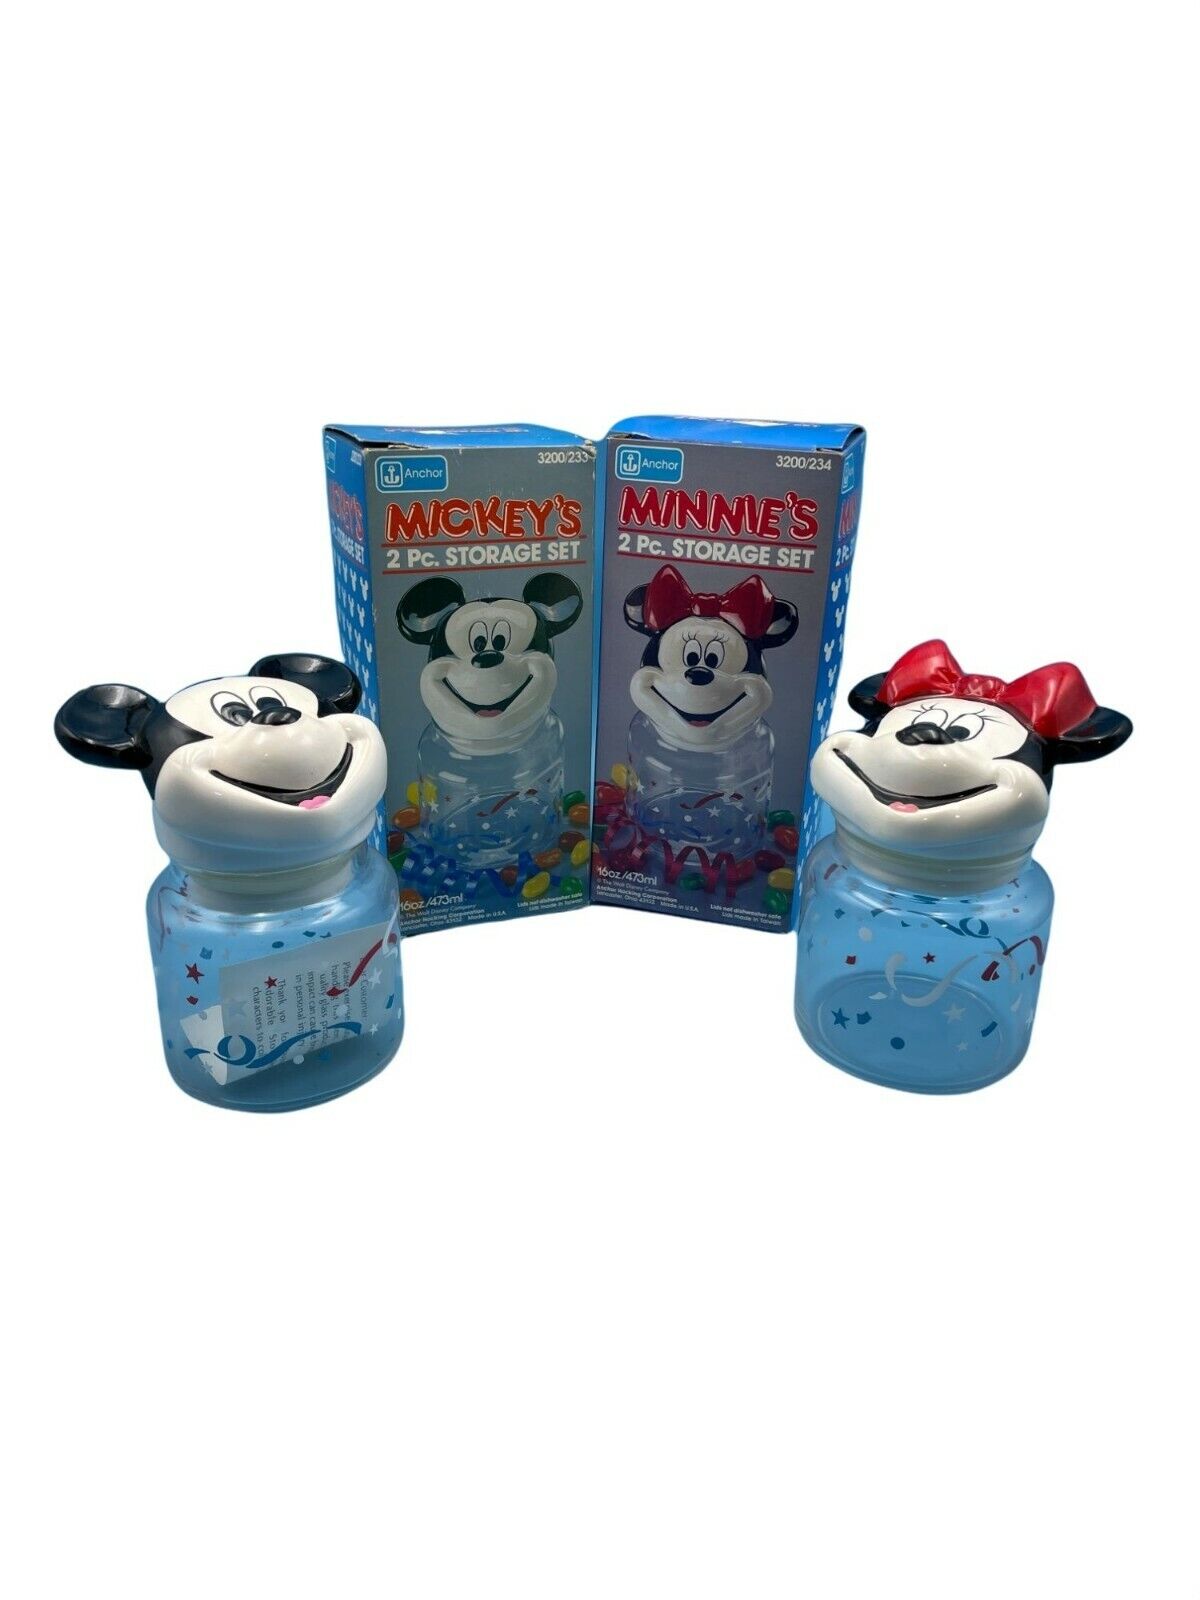 Vintage 1980\'s Anchor Hocking Mickey and Minnie Storage Containers - Walt Disney